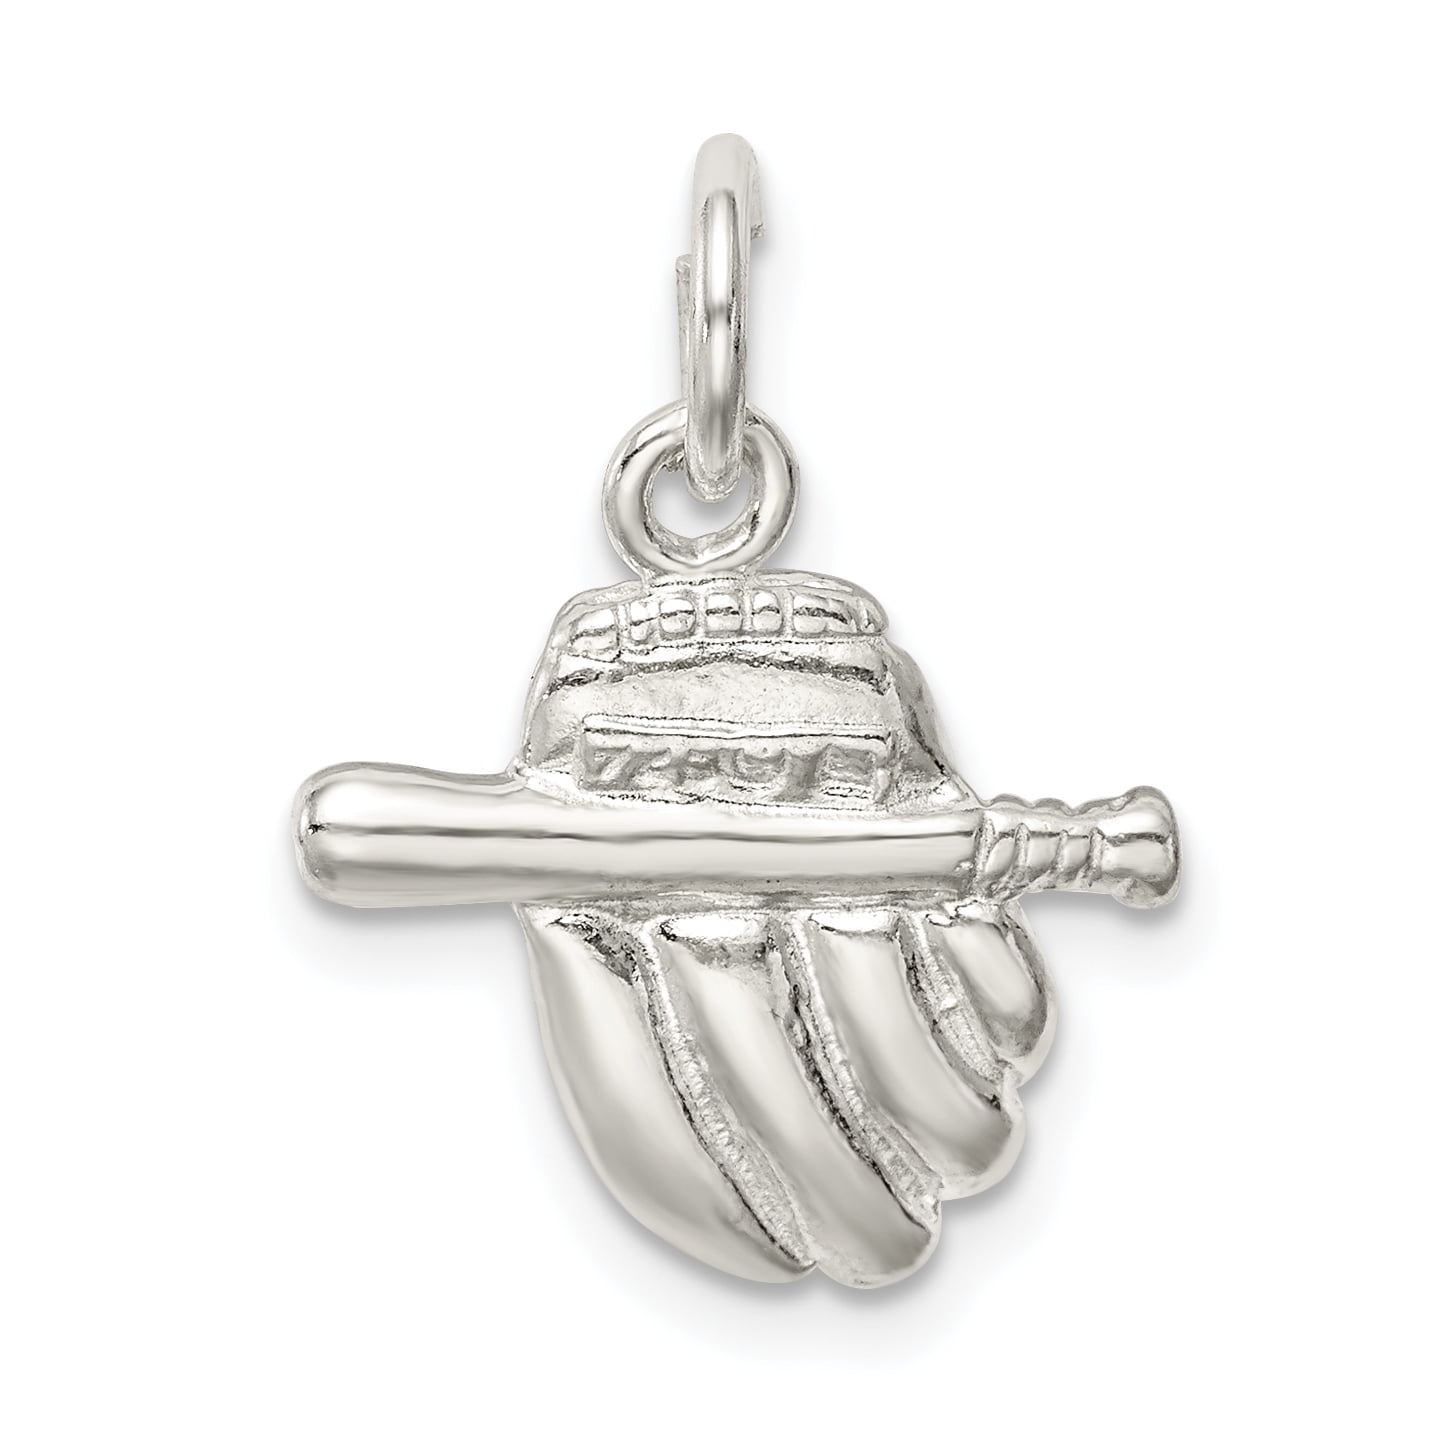 Carat in Karats Sterling Silver Polished Finish Baseball Glove Bat Charm  Pendant (17mm x 16mm) With Sterling Silver Rope Chain Necklace 20'' 